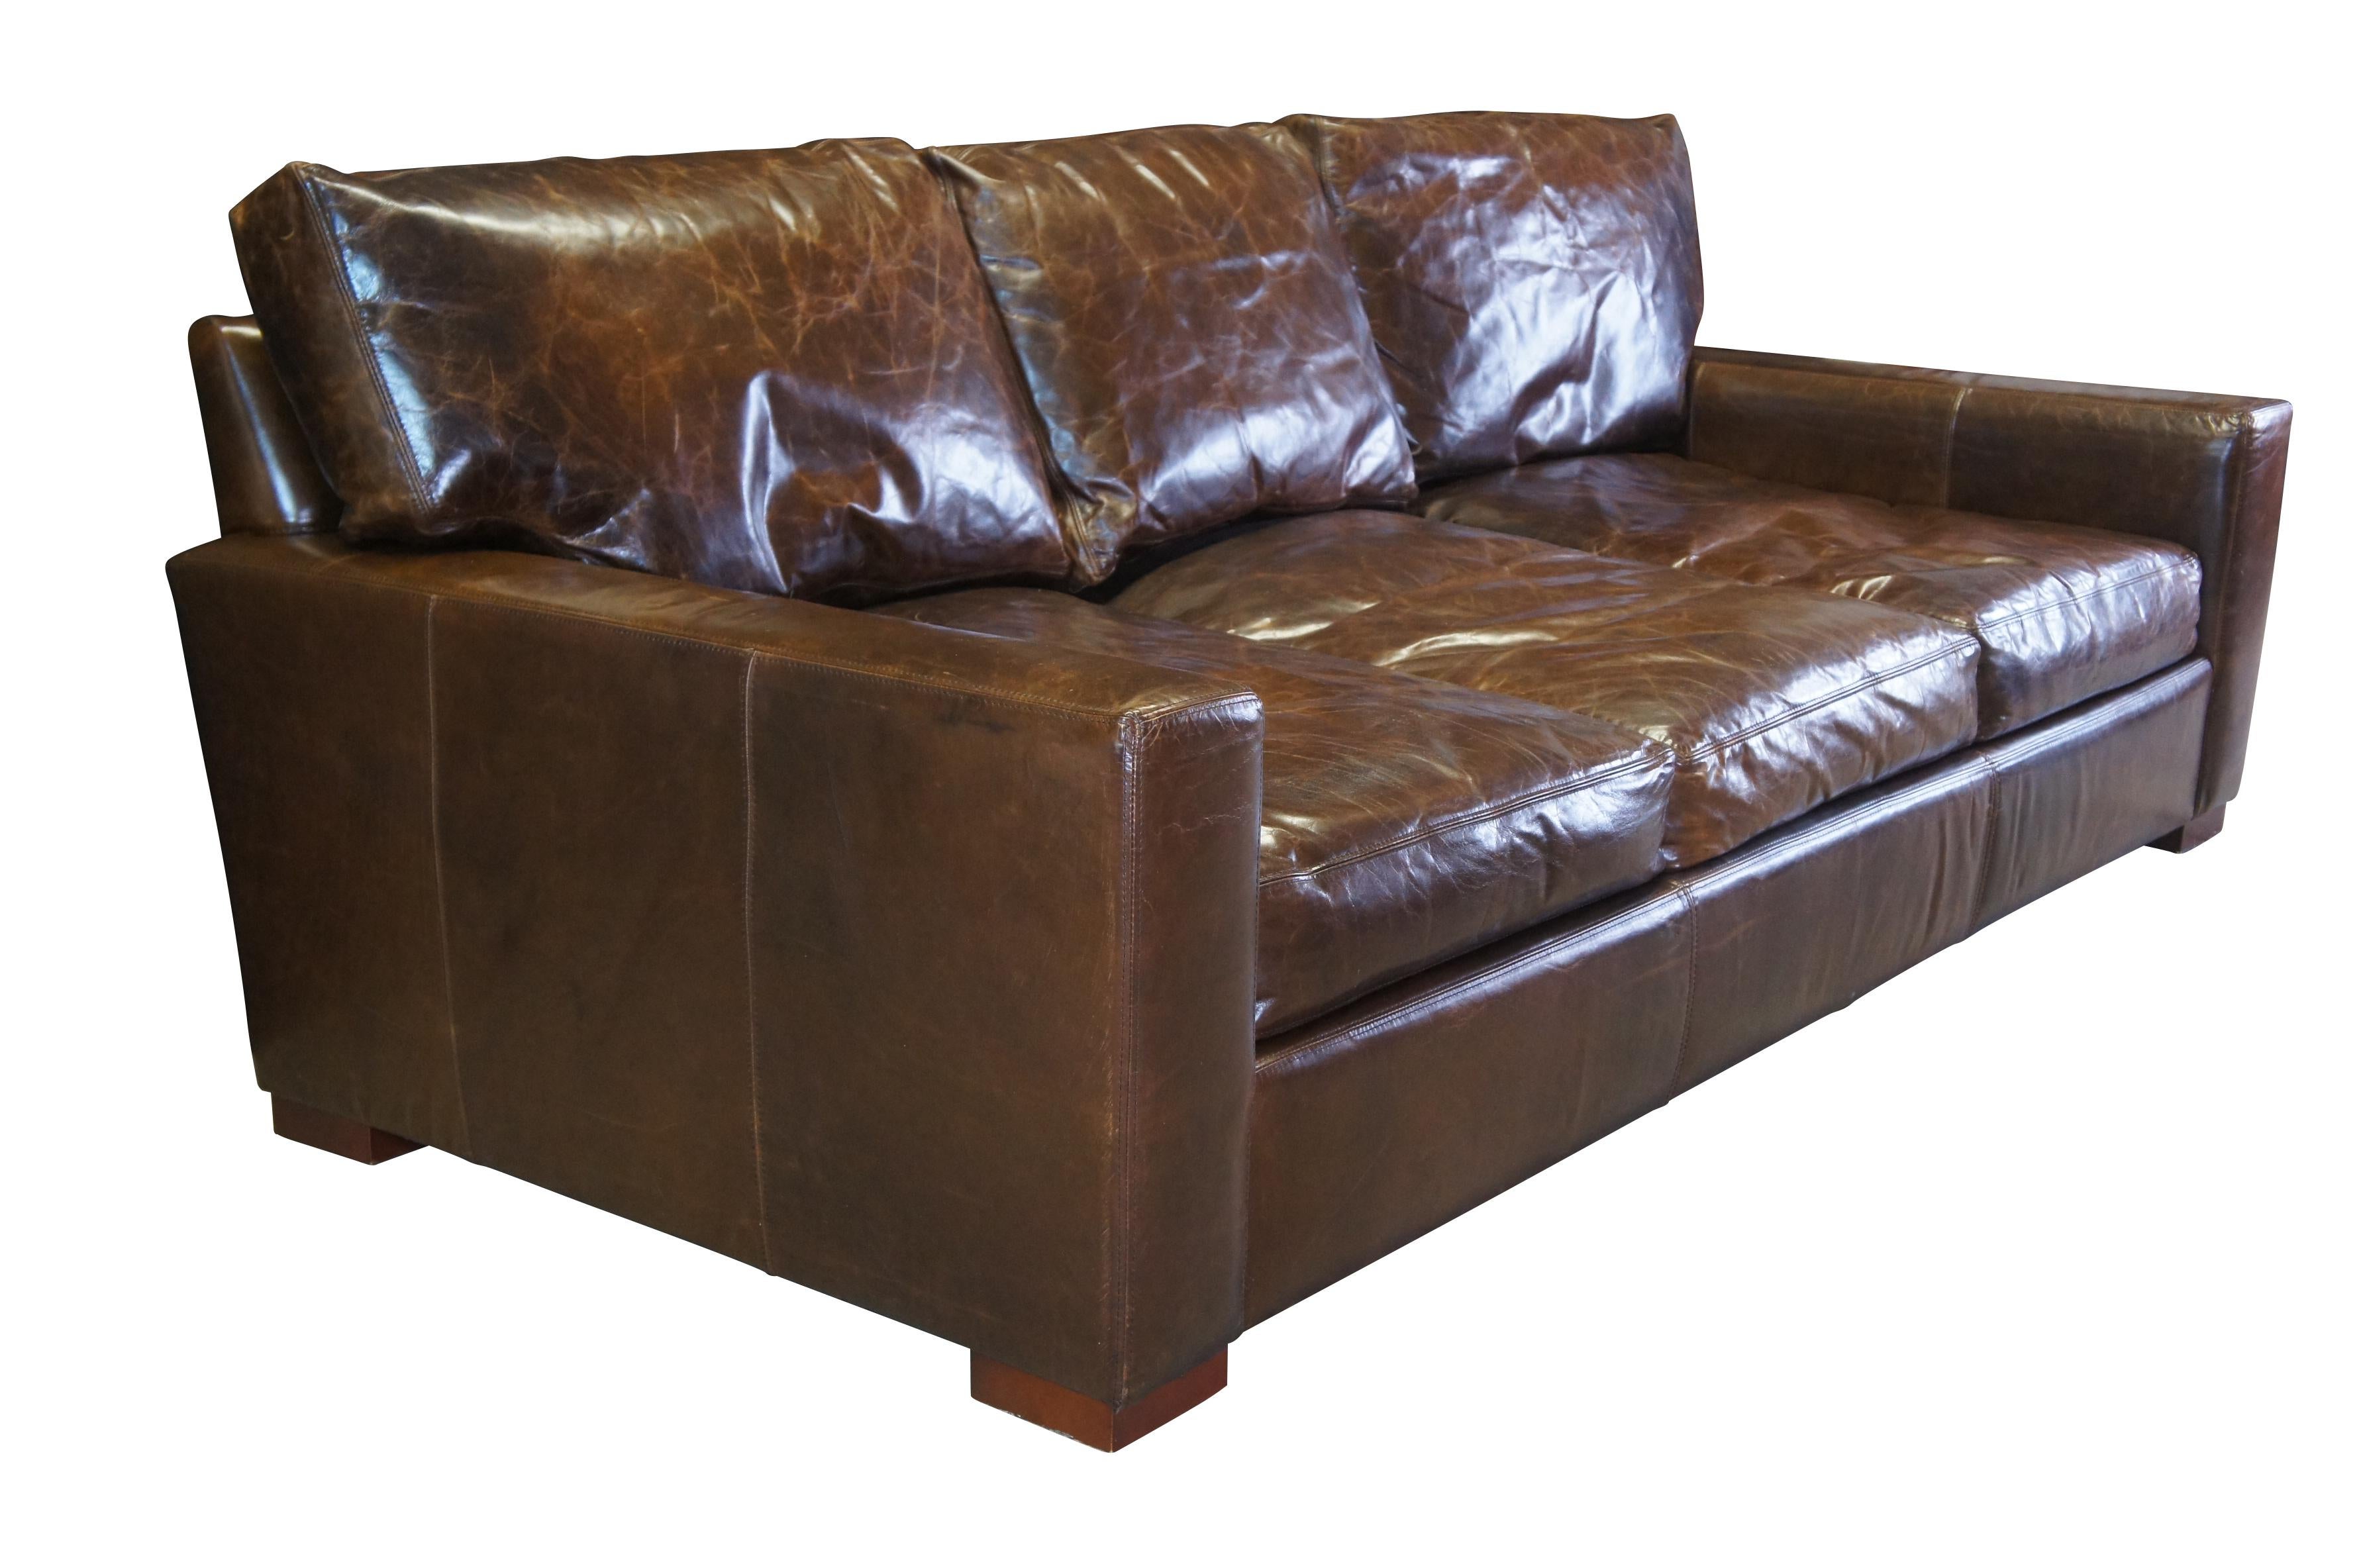 A luxurious 3 Seater sofa by Restoration Hardware. The Maxwell is upholstered in a supple cocoa brown leather for maximum comfort. Cutting a clean lined silhouette with ultra-deep proportions, this sofa features squared, track arms and a modernist,